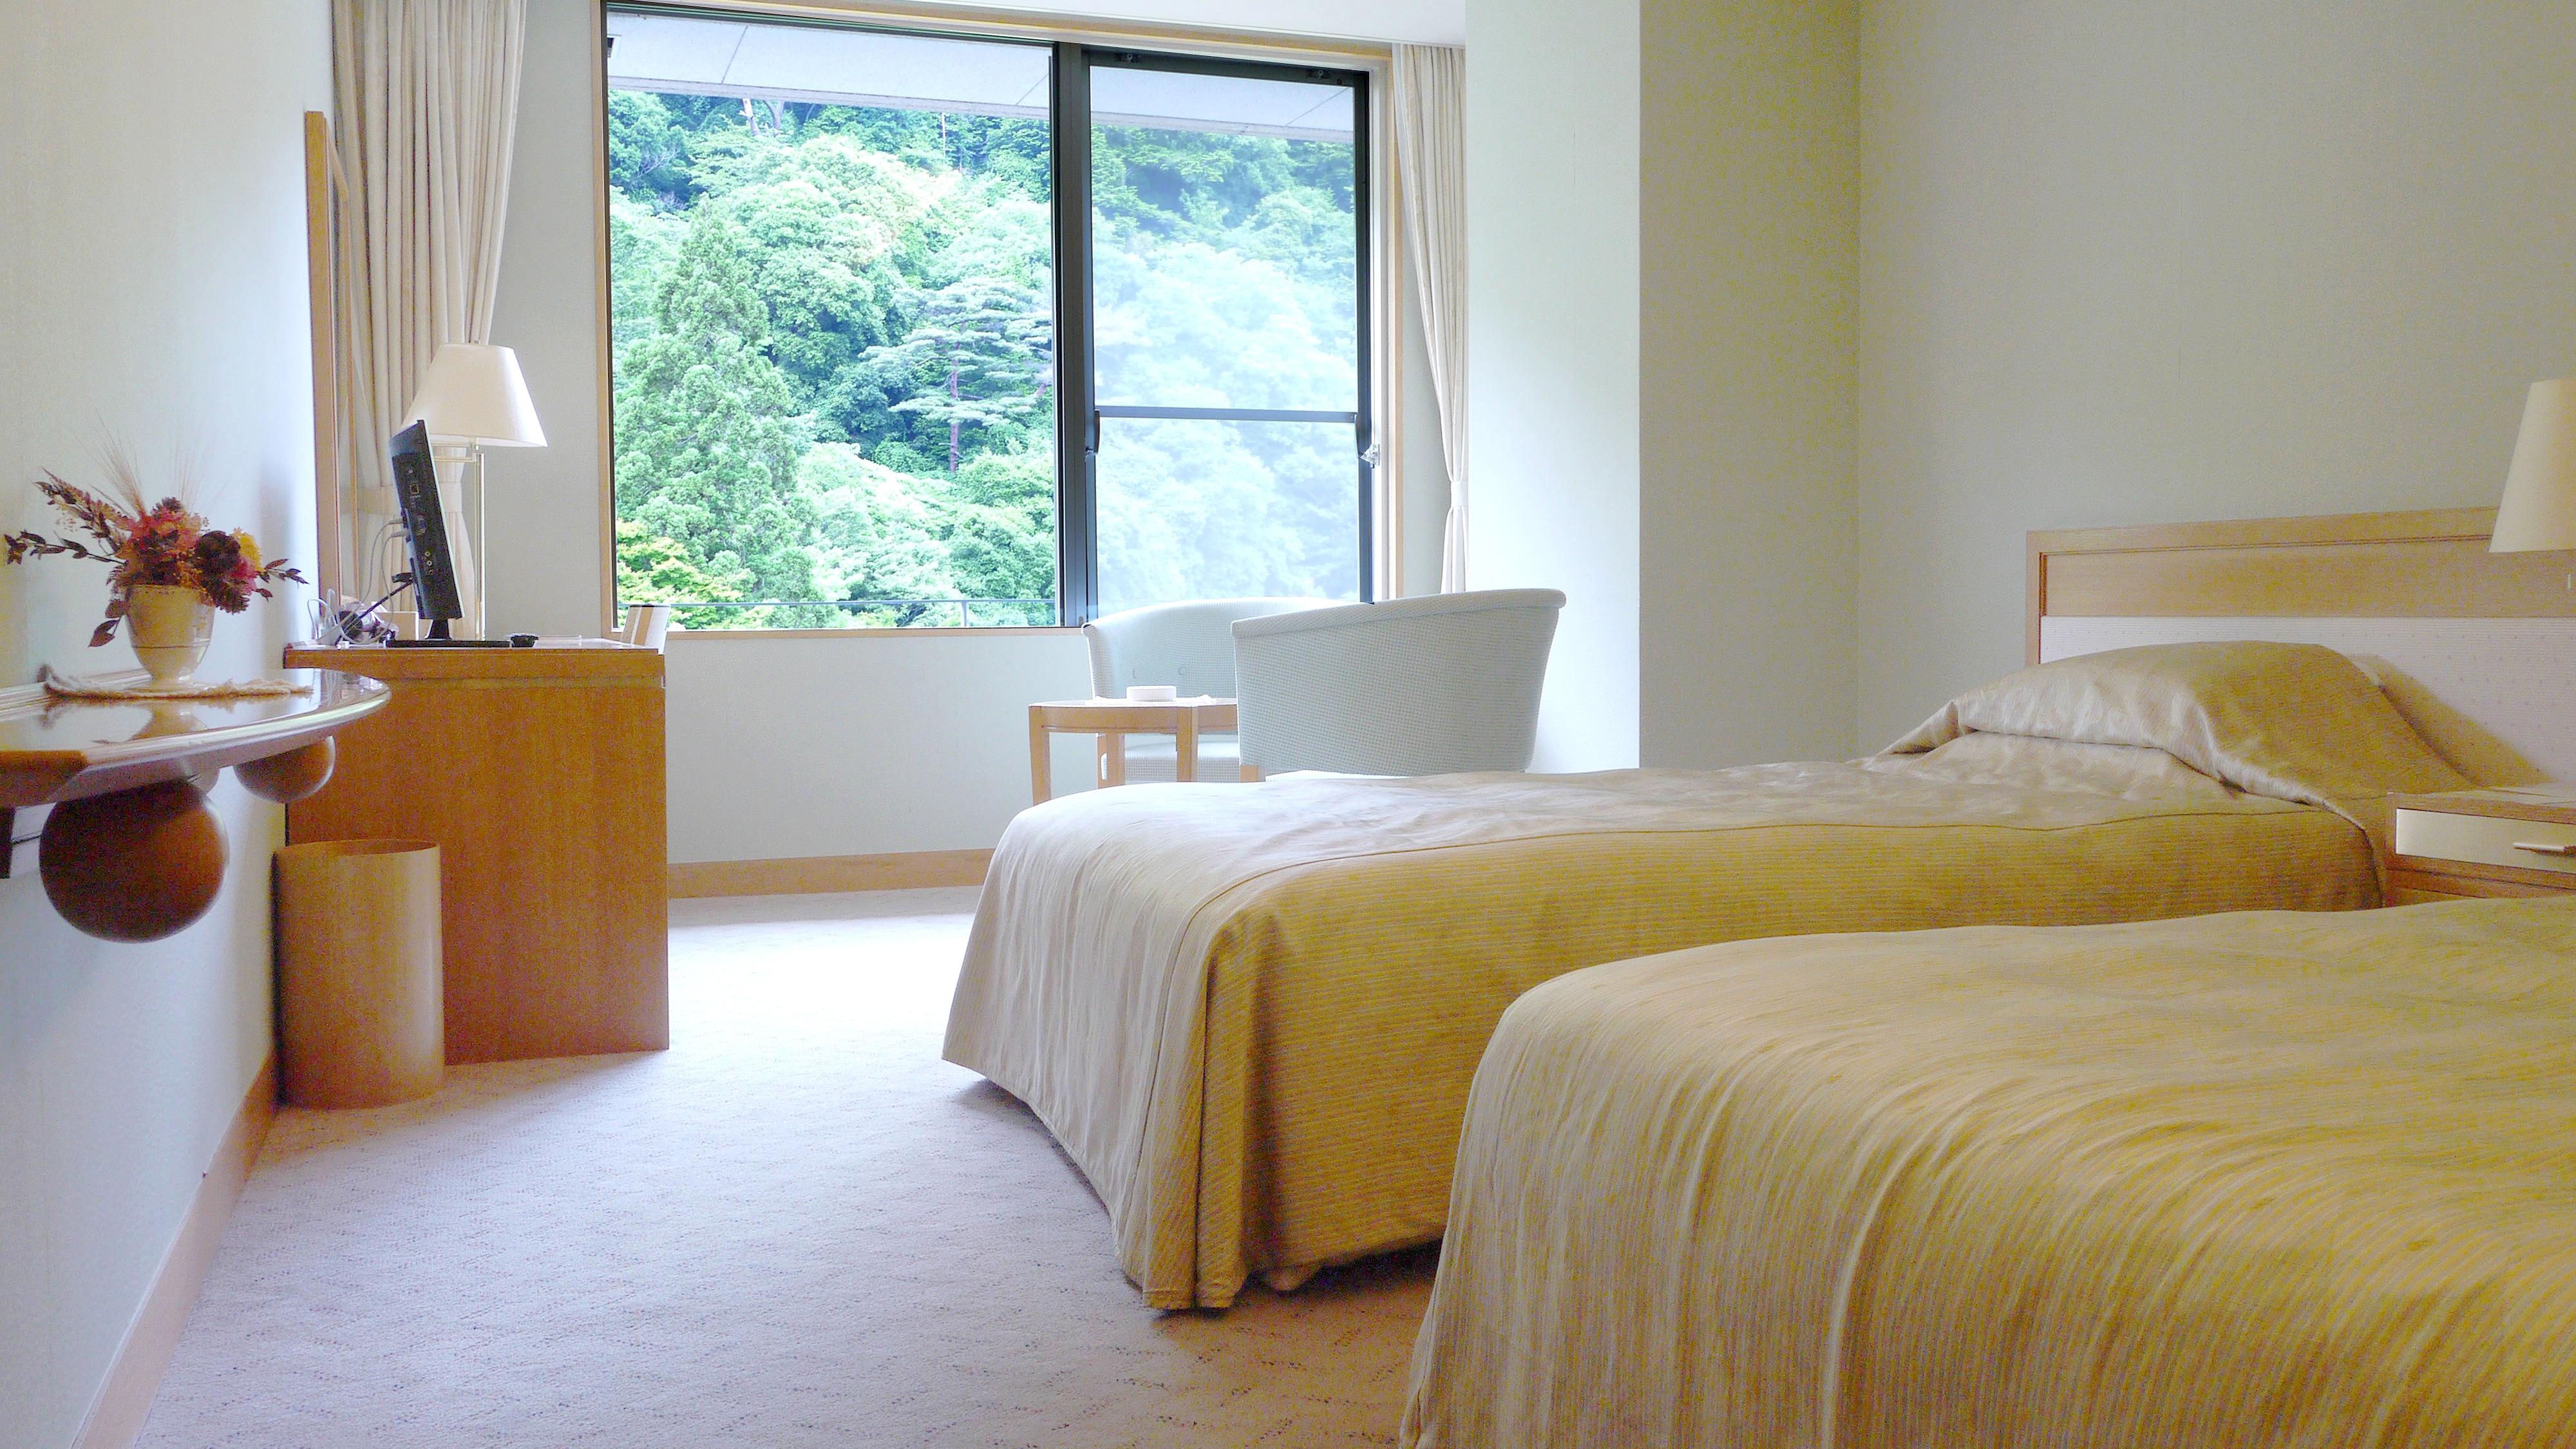 Western-style twin room (20.5㎡) ◆ We have 3 standard Western-style rooms.